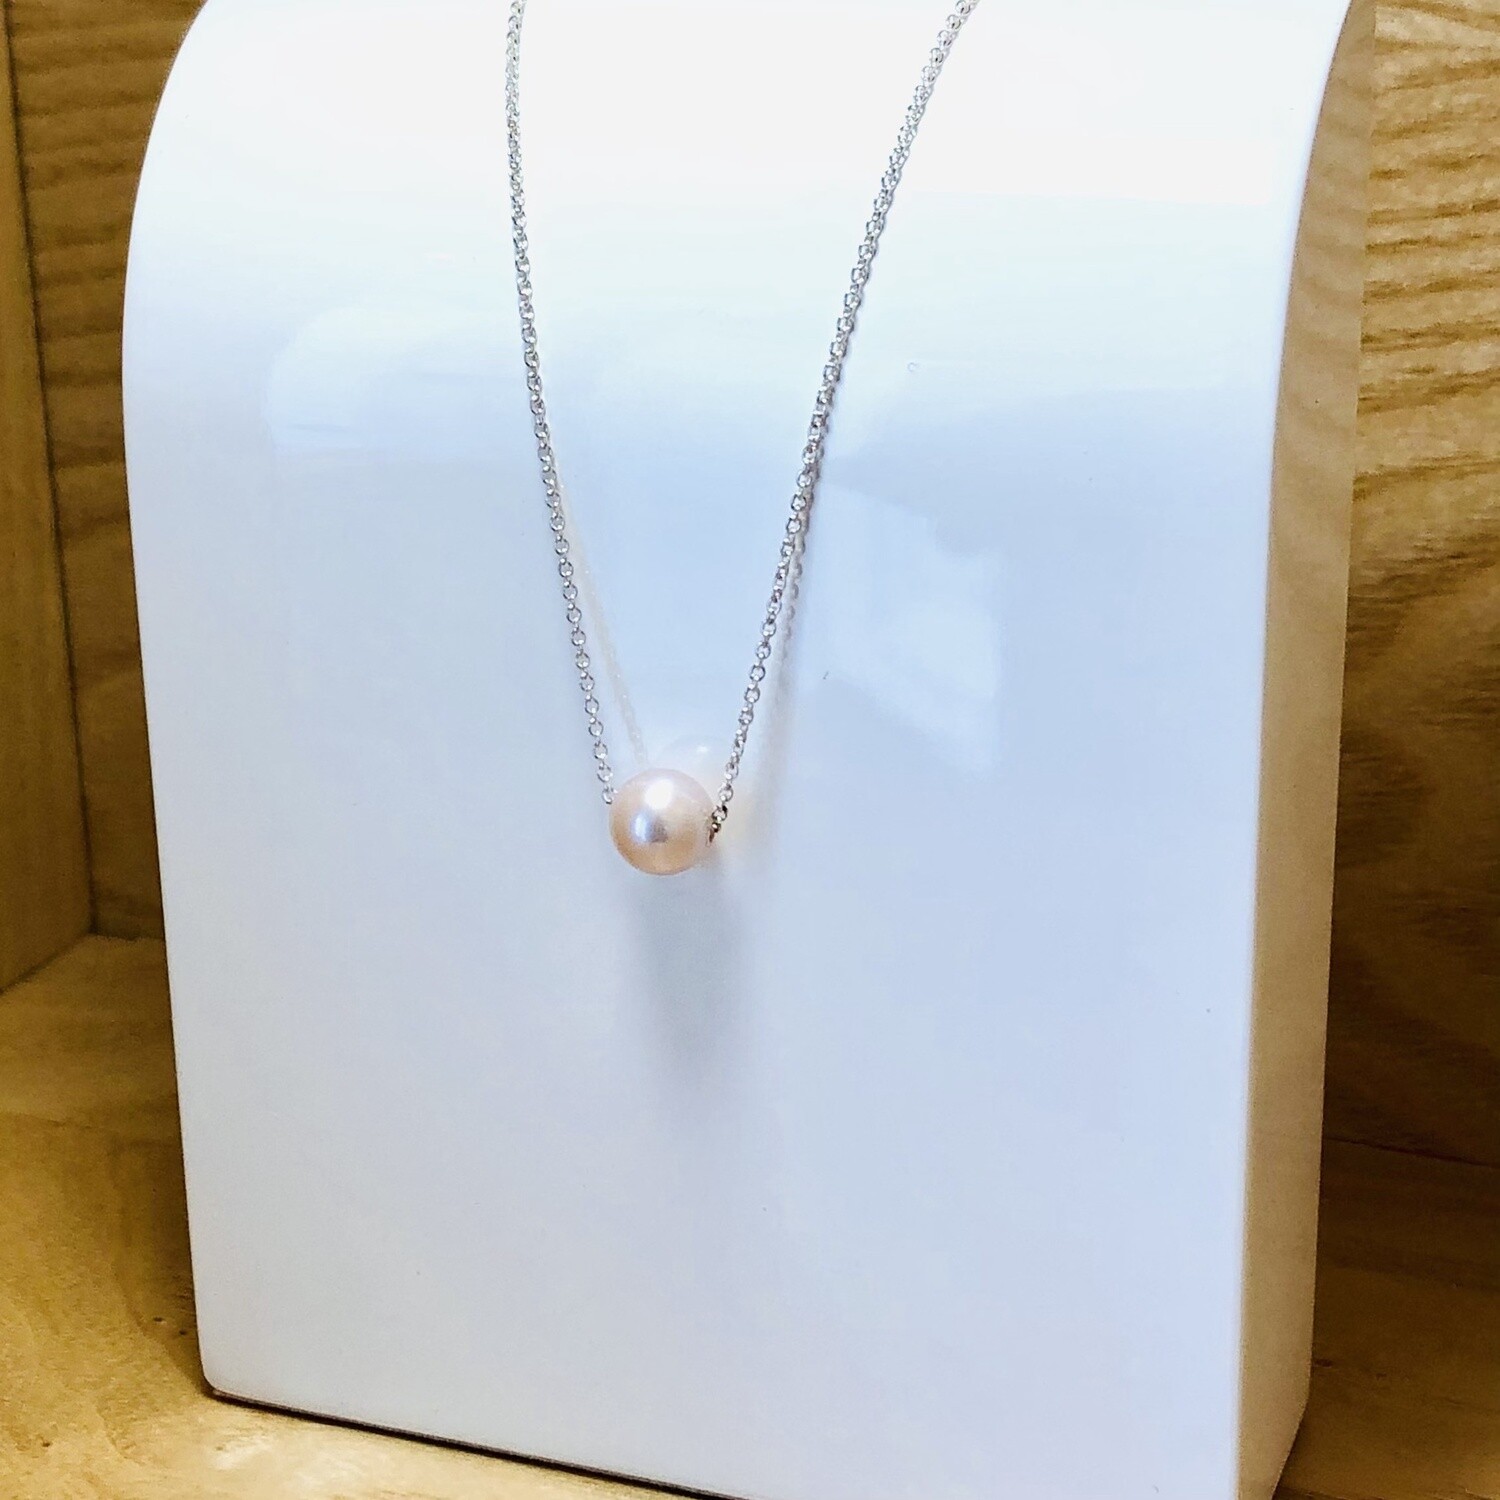 Floating pearl on silver chain